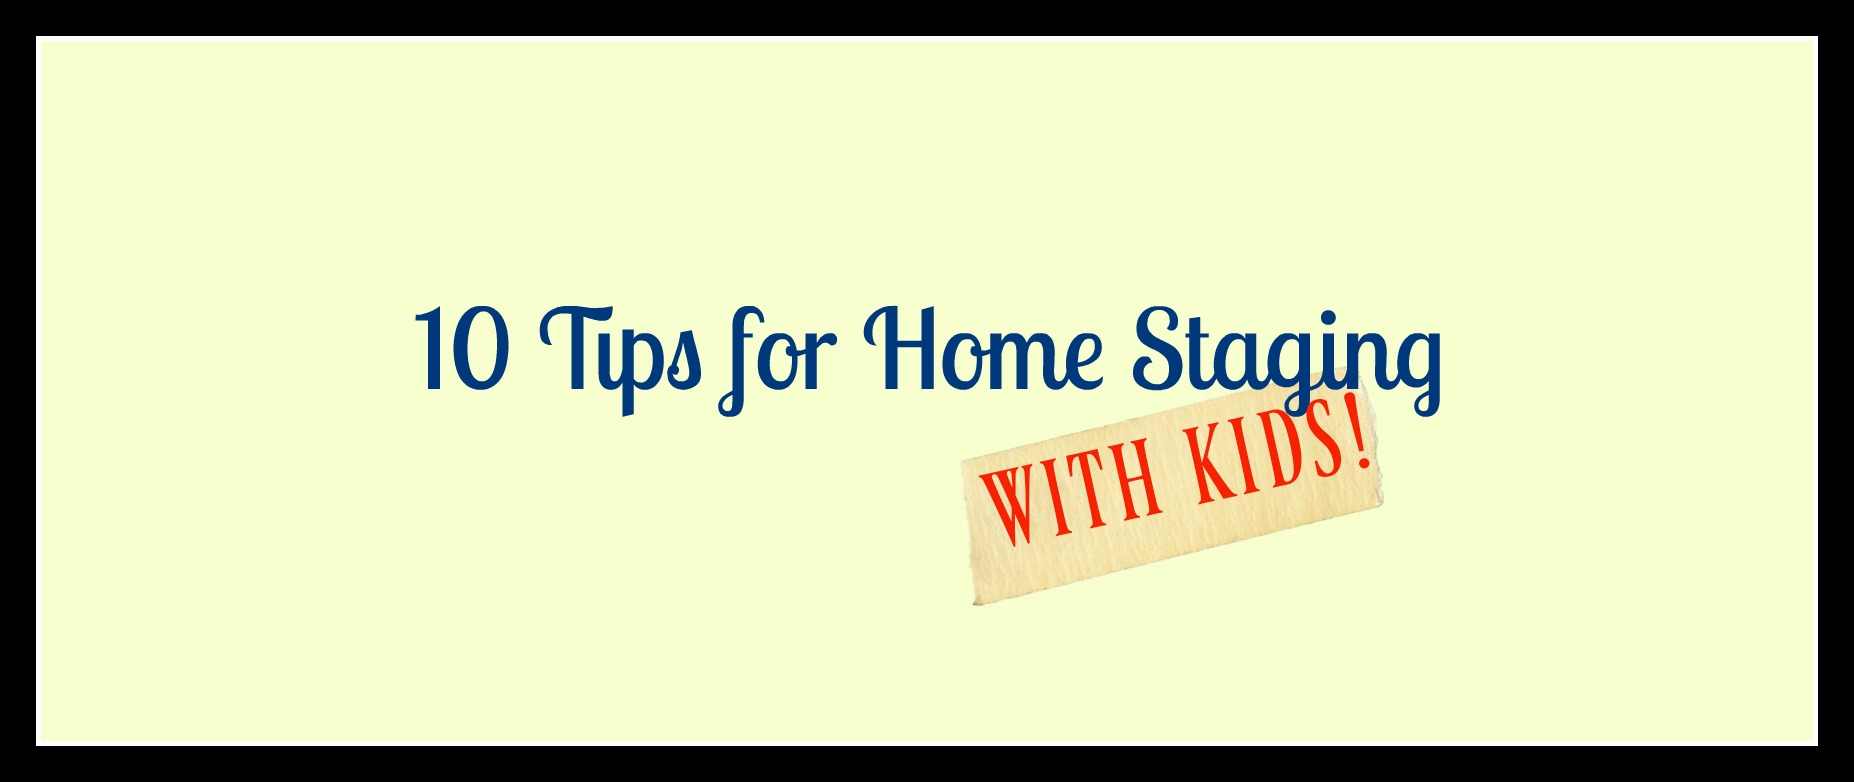 ​TEN TIPS FOR HOME STAGING WITH KIDS